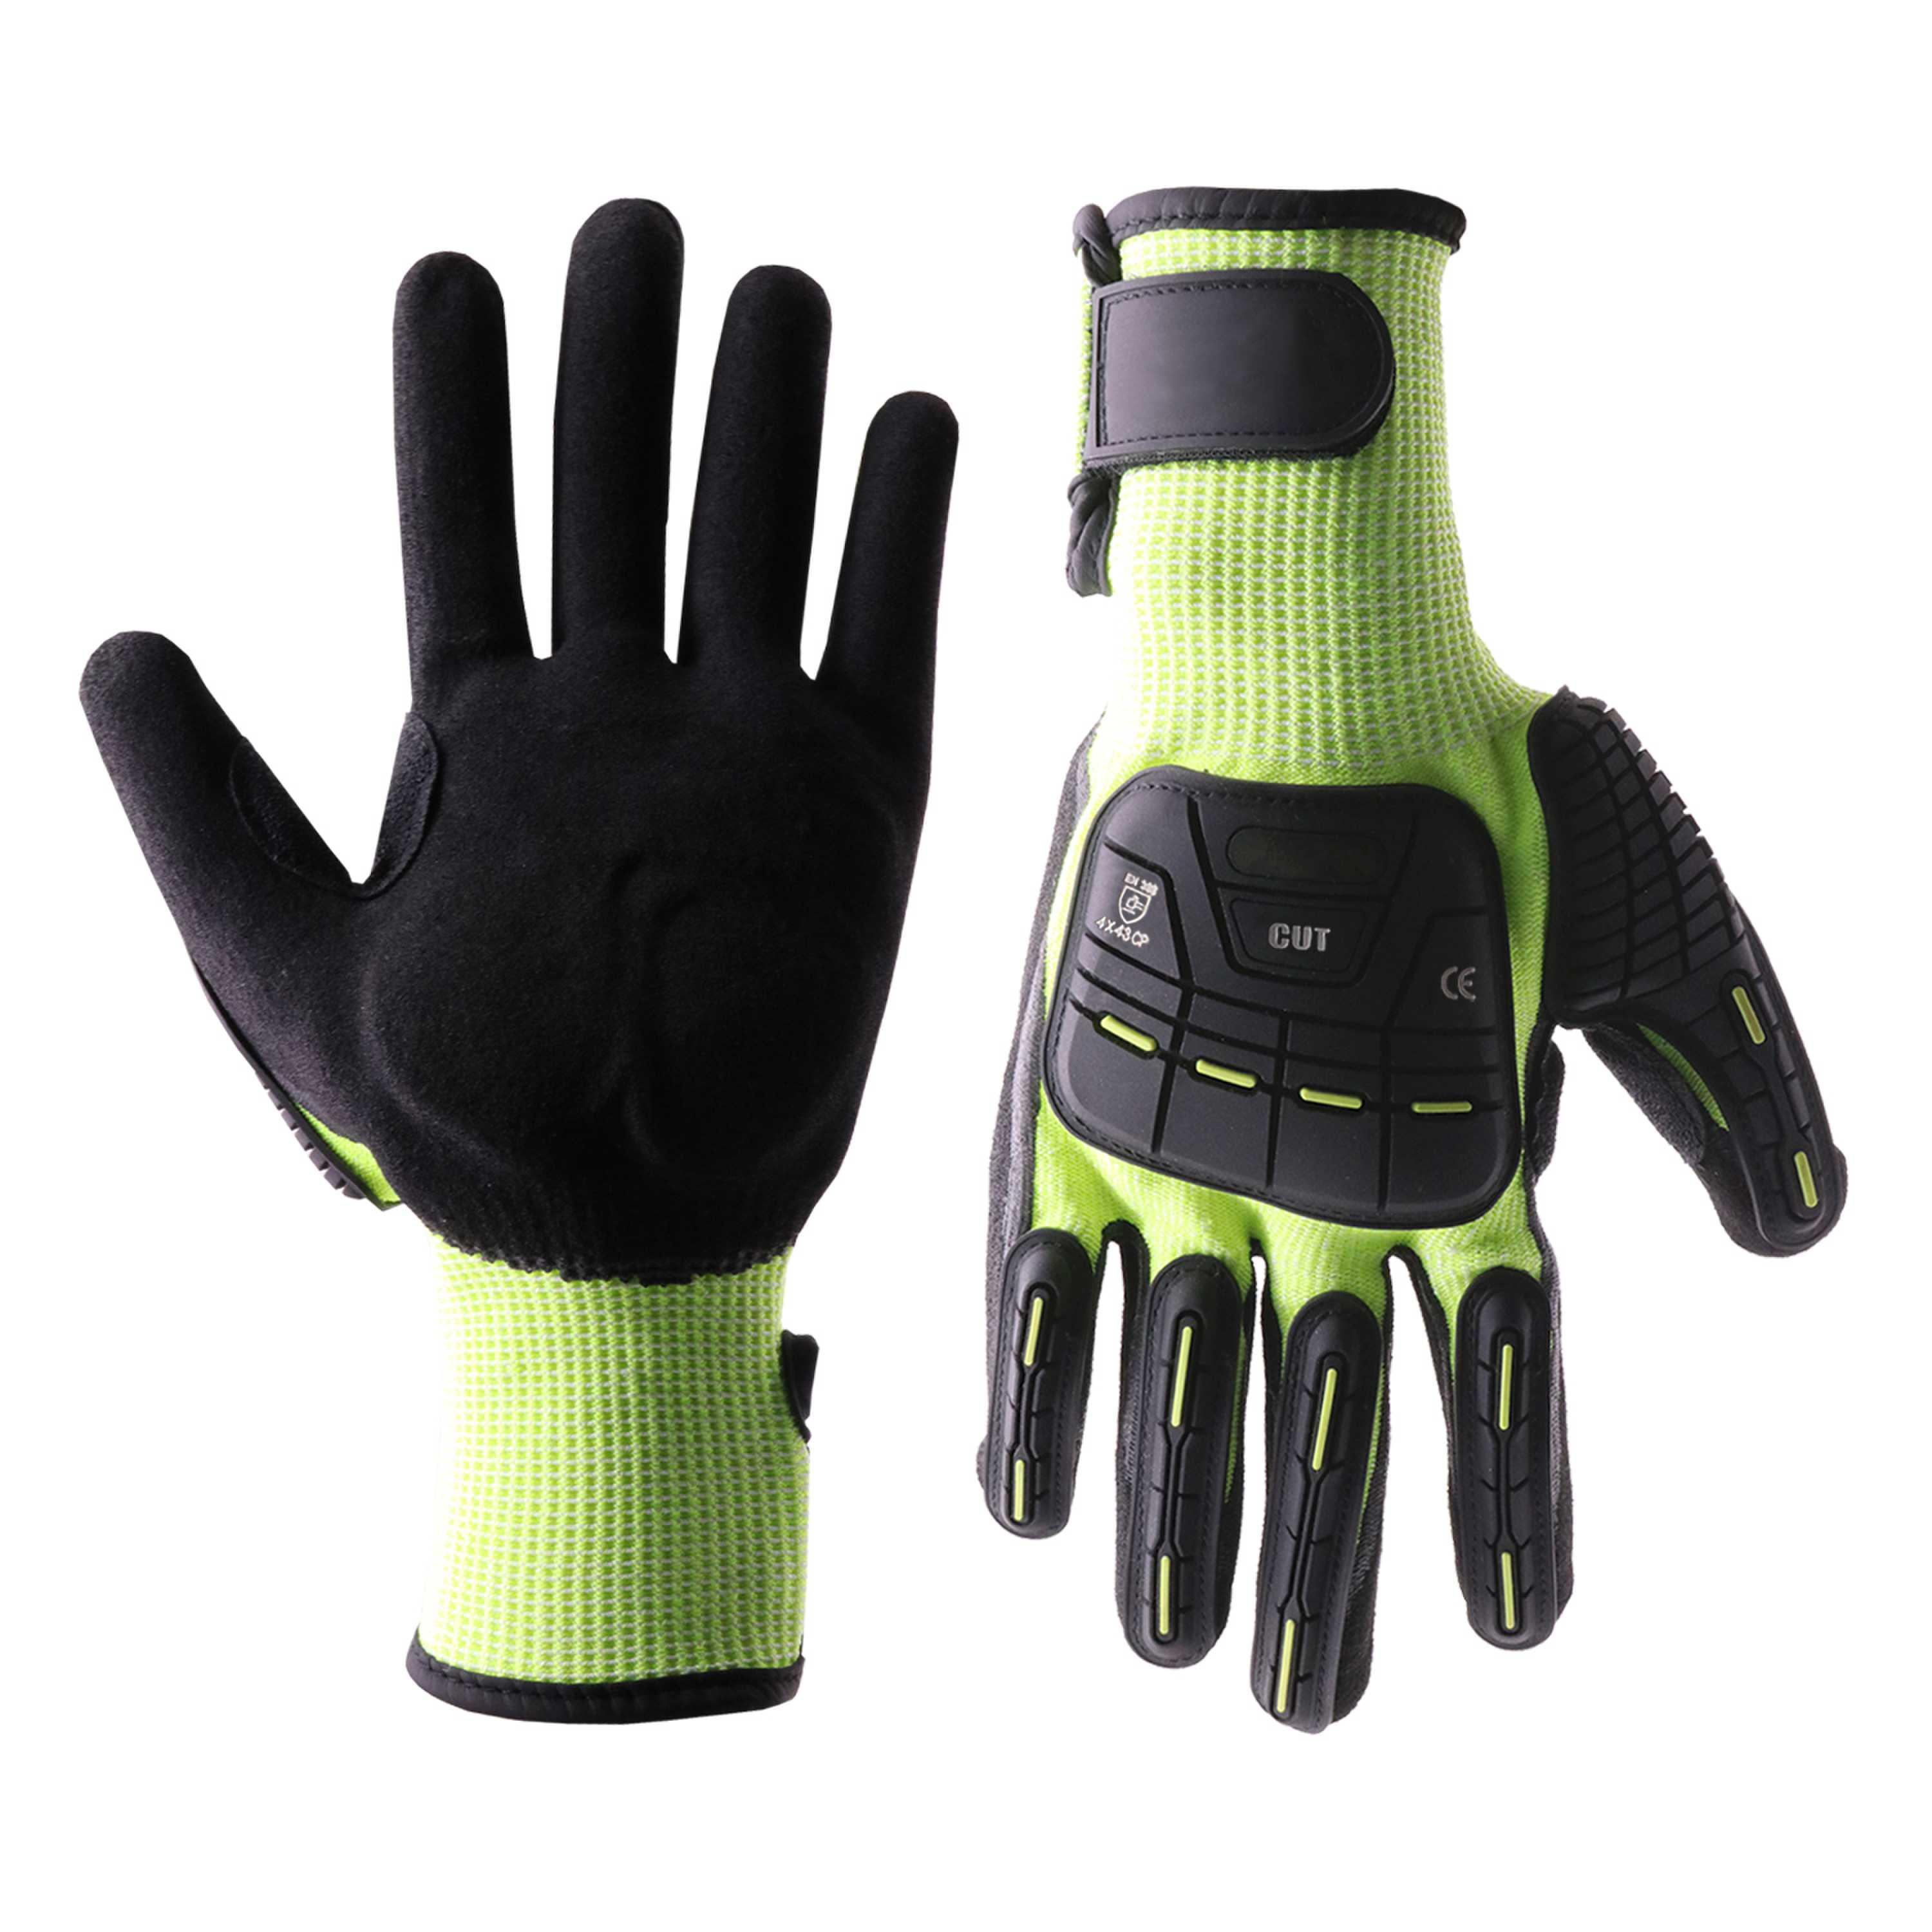 1123 PRISAFETY Industry Automotive Hand Protection Cut 5 Safety Gloves Cut Resistant Mechanical gloves